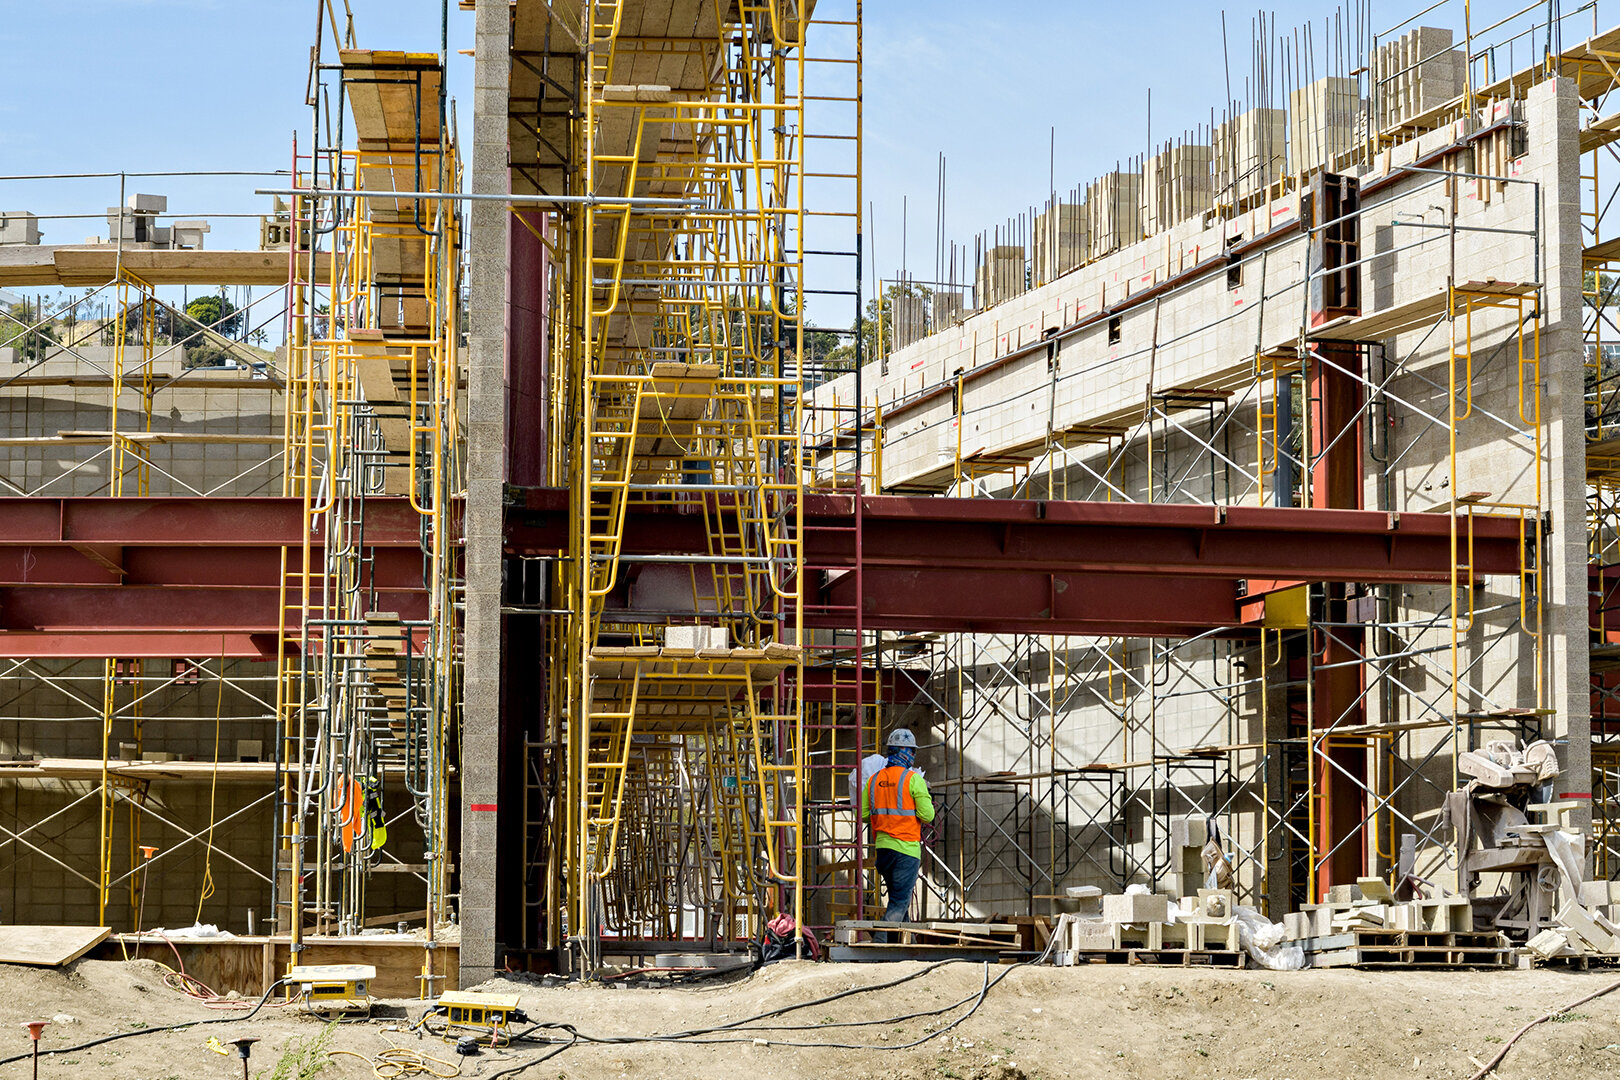  Construction workers on the site of the Santa Monica College (SMC) Malibu campus in Malibu, Calif., on Monday, April 5, 2021. Building at the site has been proceeding for the last year, and the campus is scheduled to be finished by the end of 2021, 